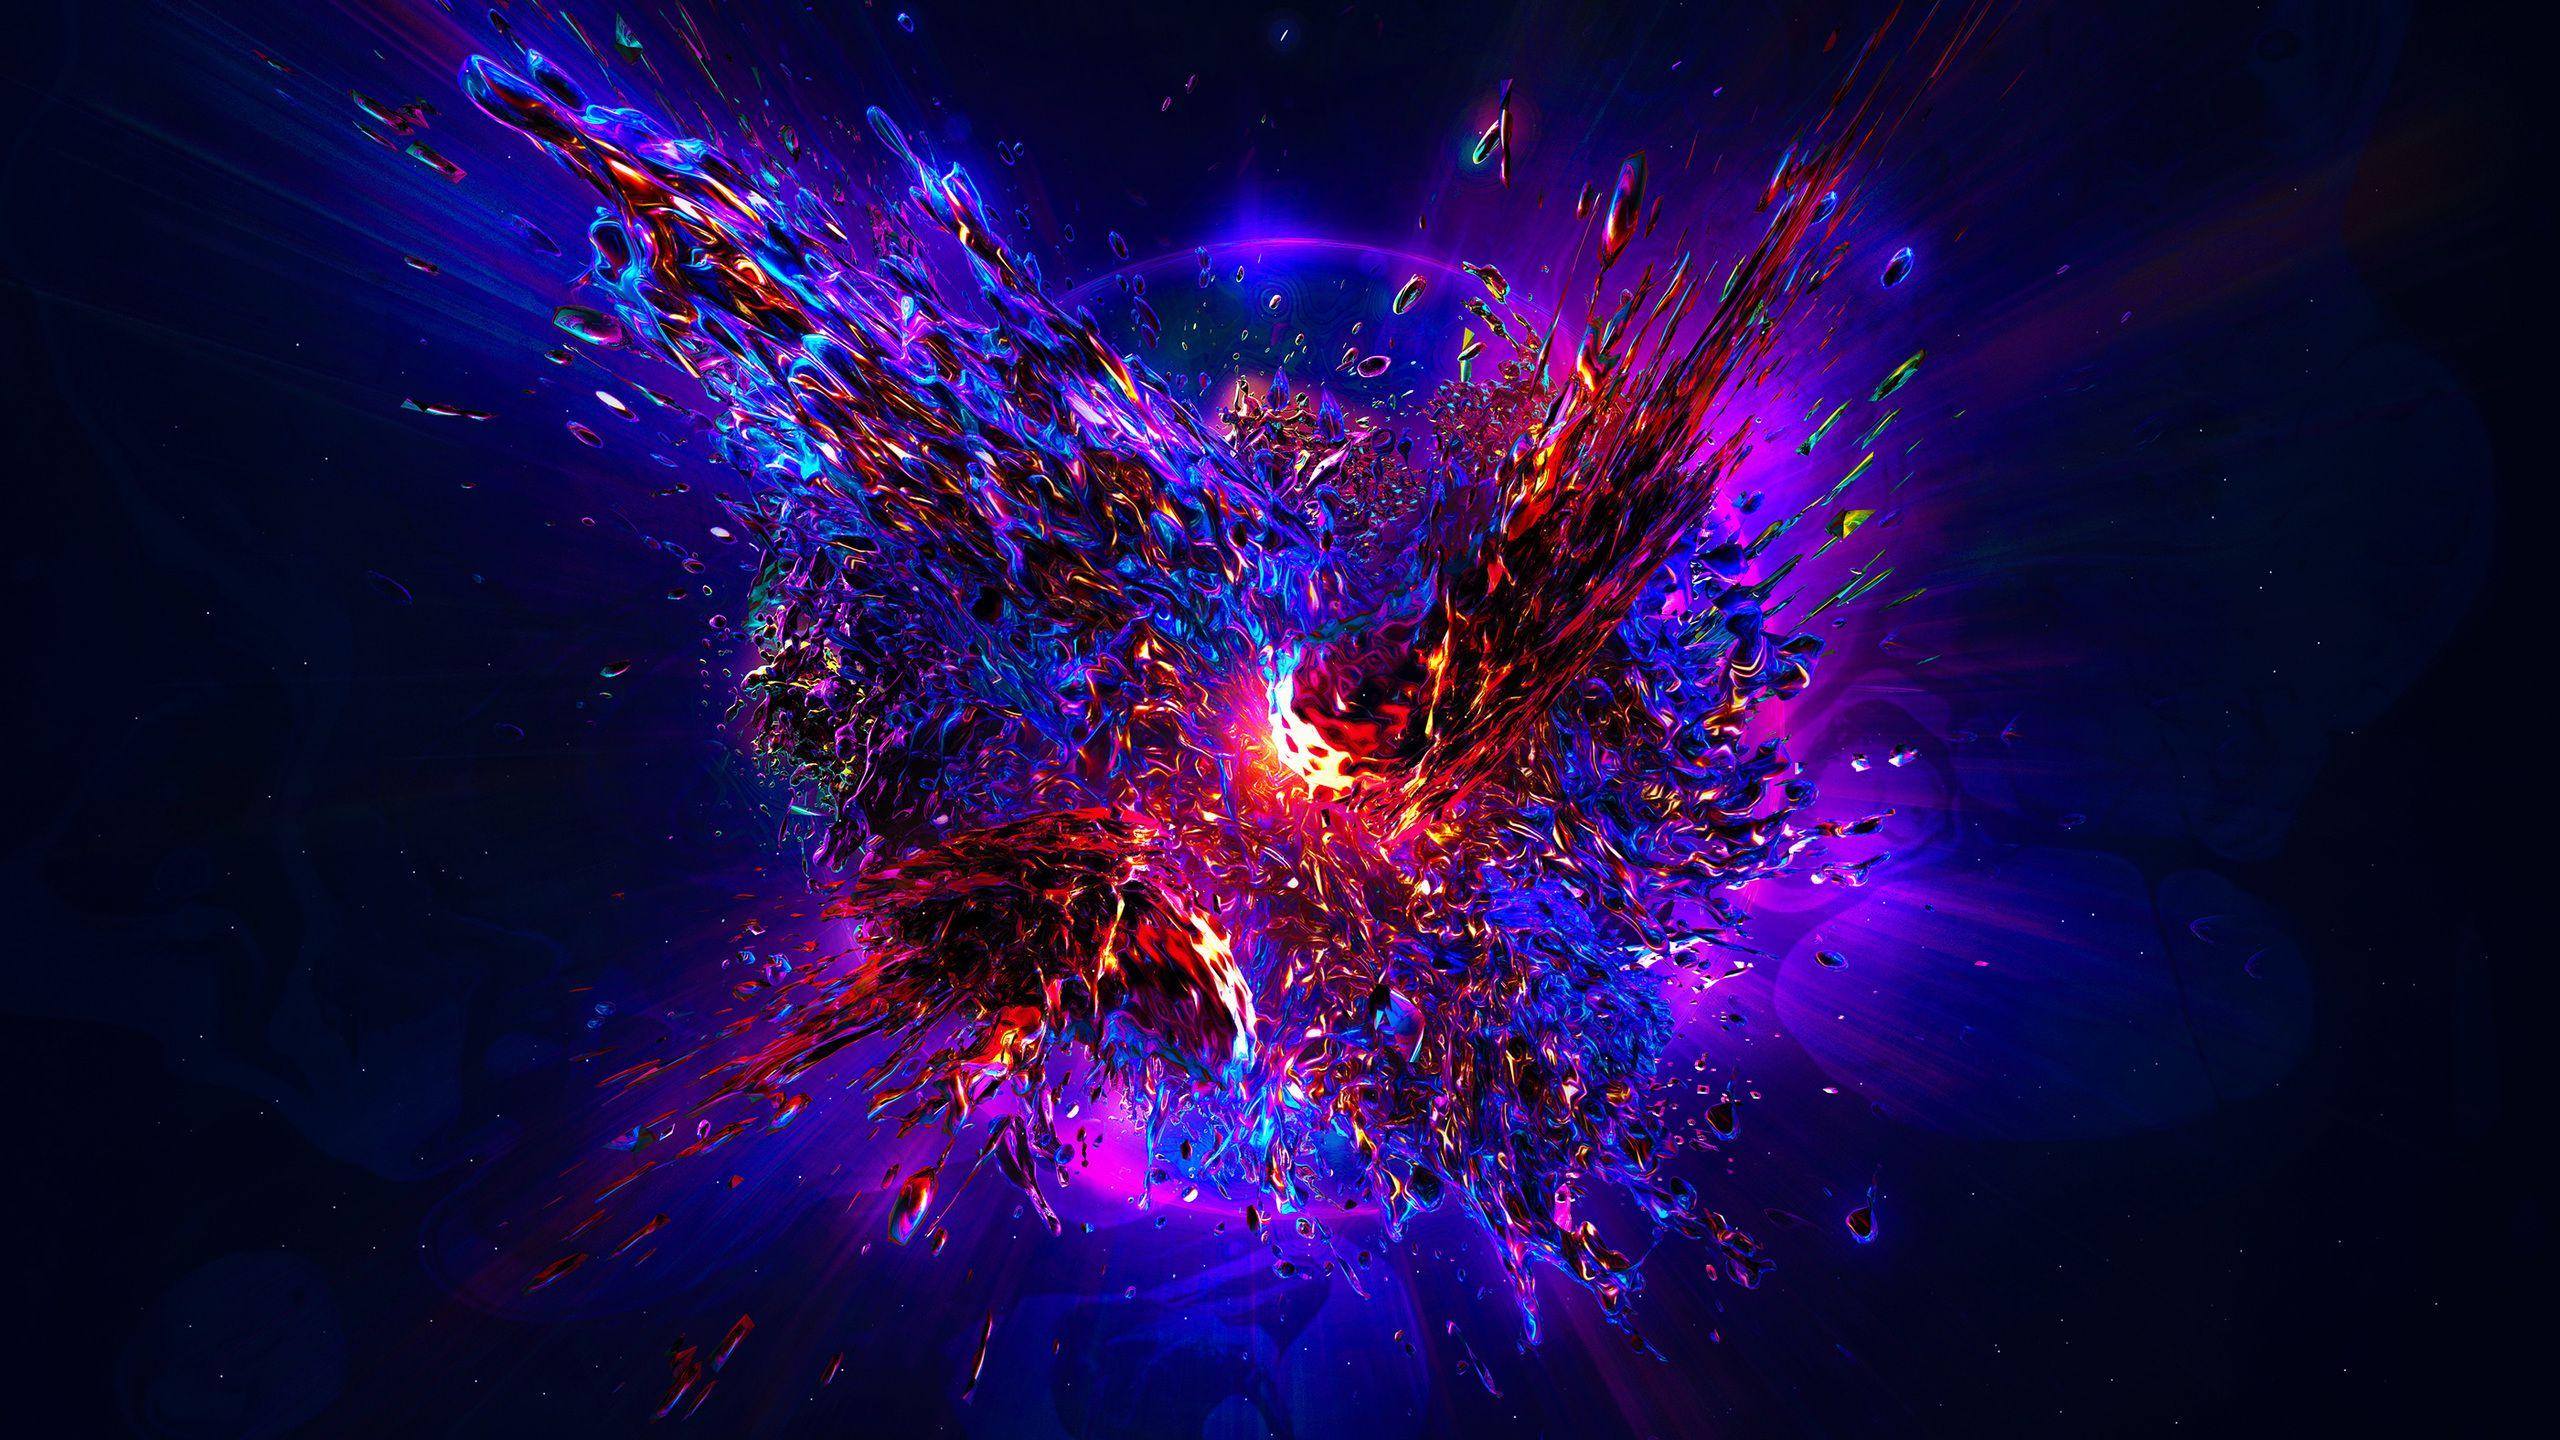 Hd Explosion Wallpapers Top Free Hd Explosion Backgrounds